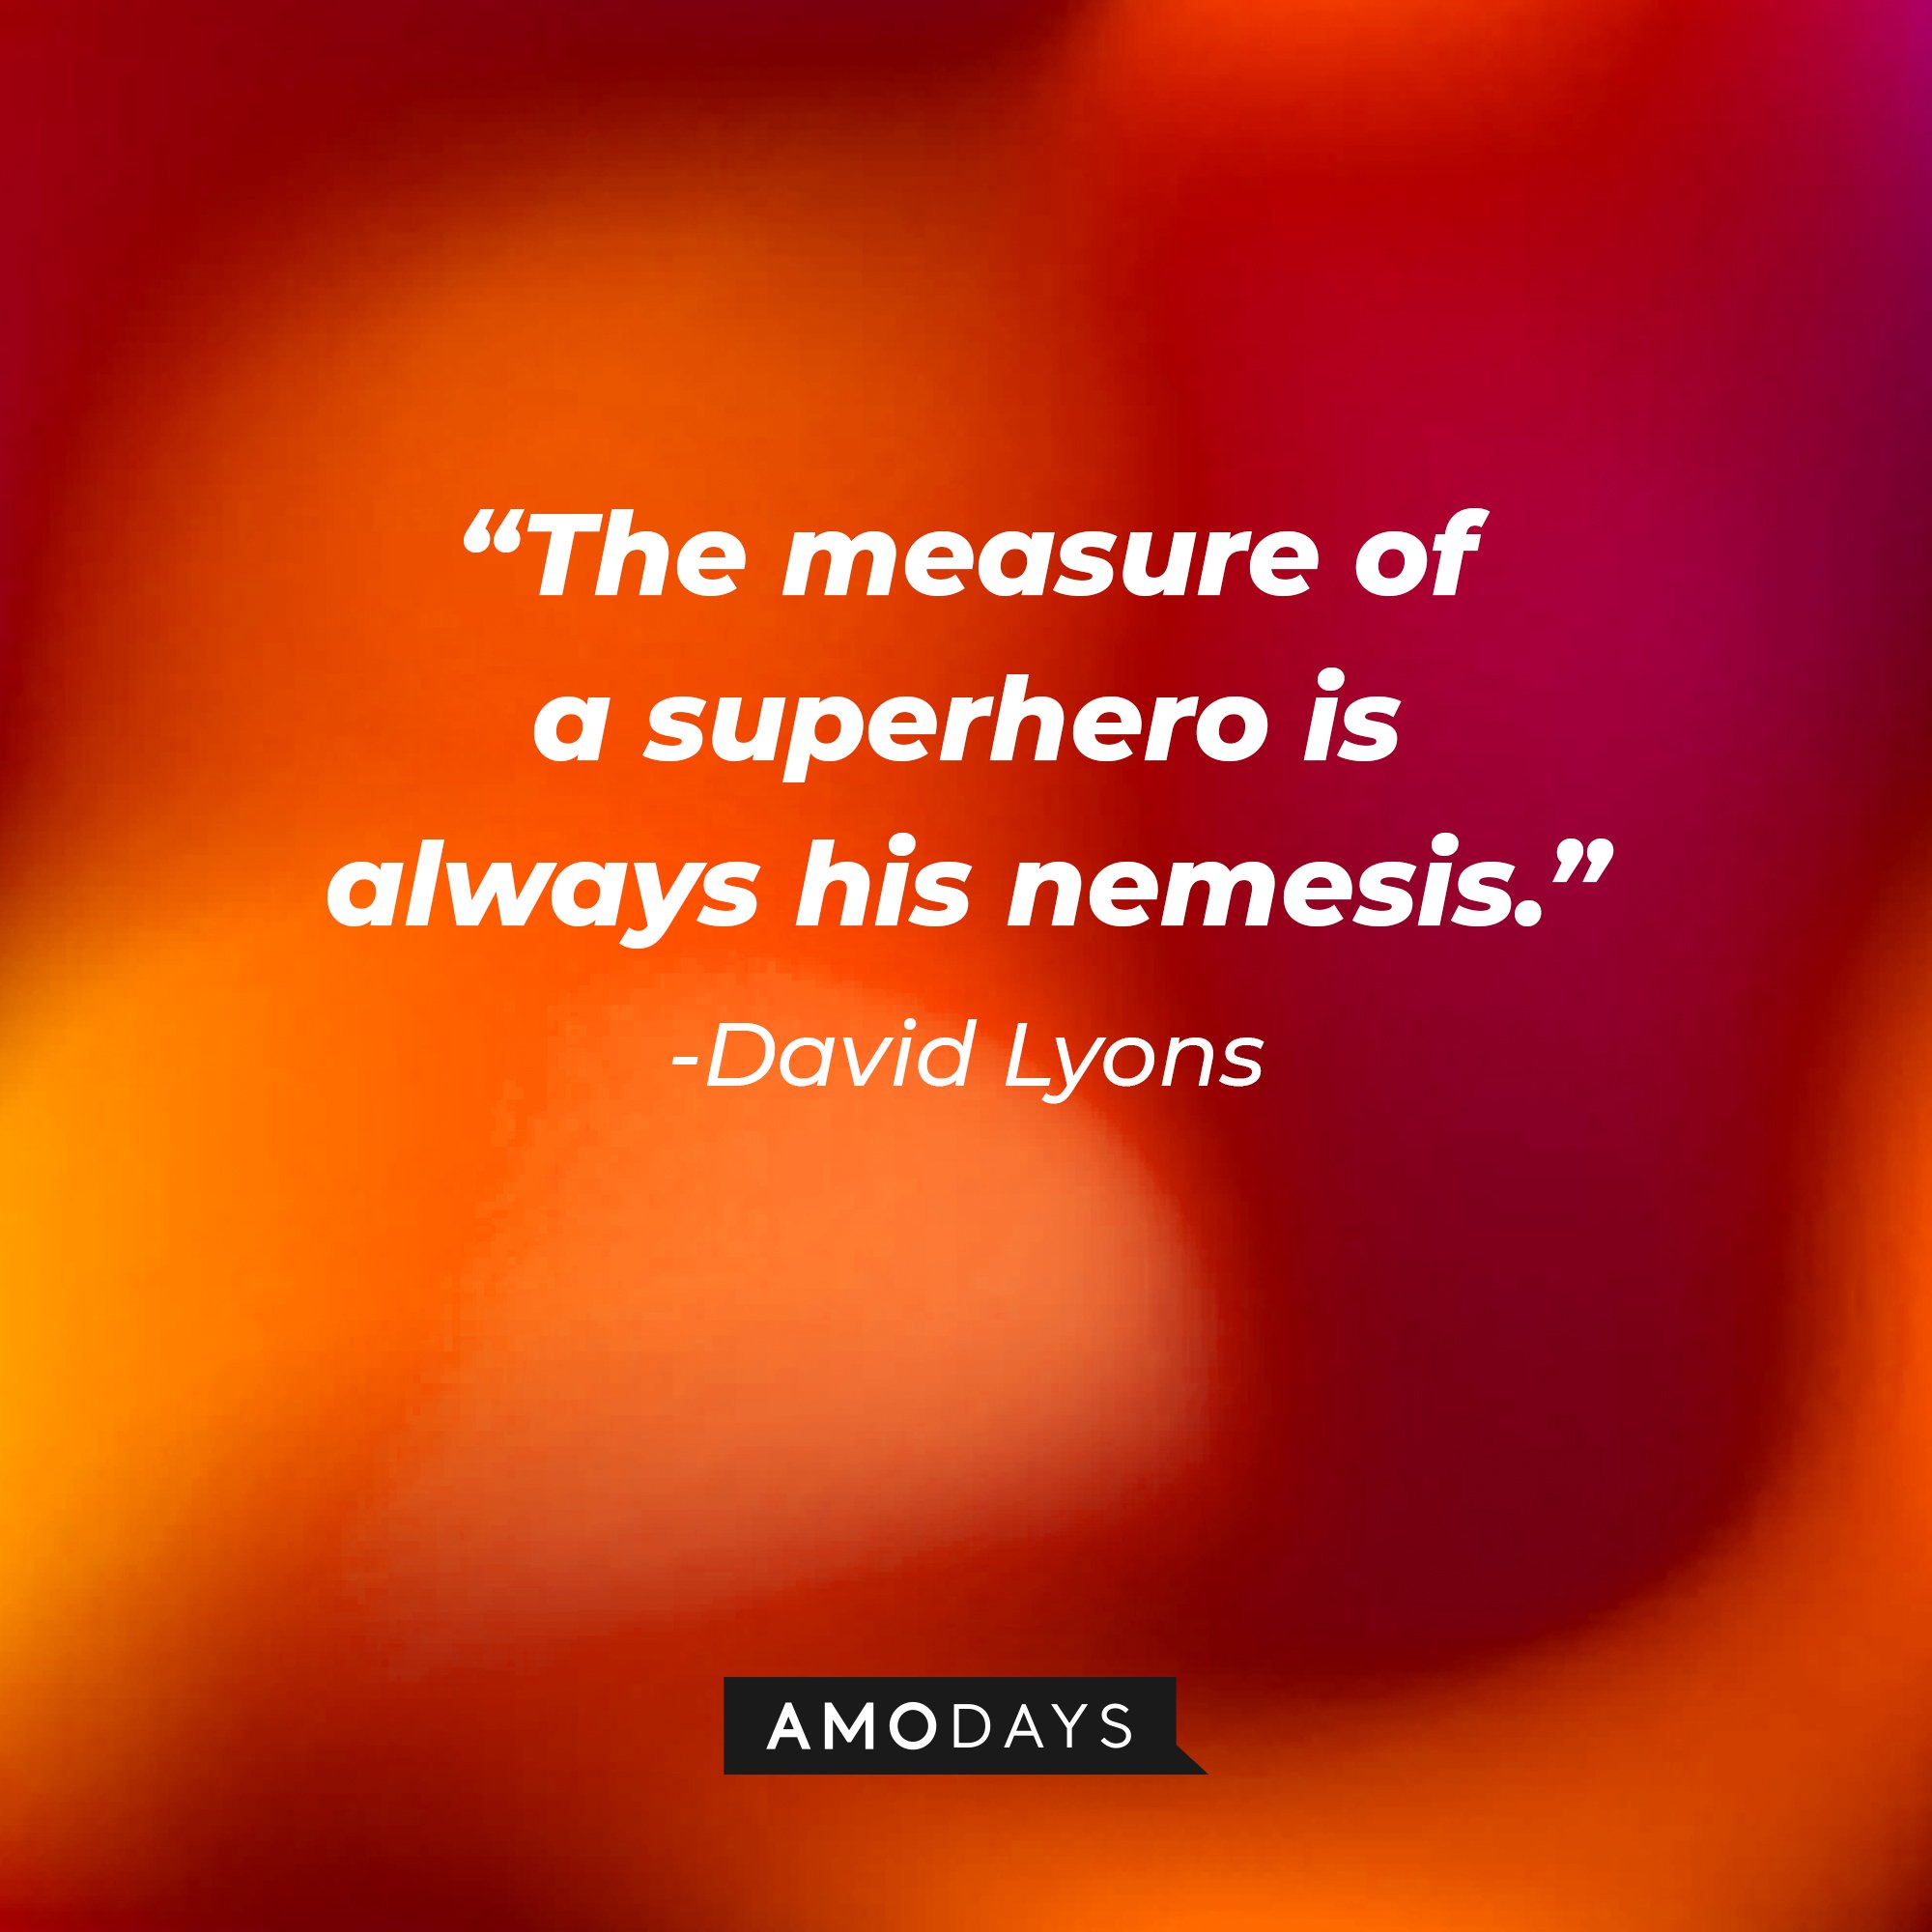 David Lyons's quote: “The measure of a superhero is always his nemesis.” | Image: AmoDays